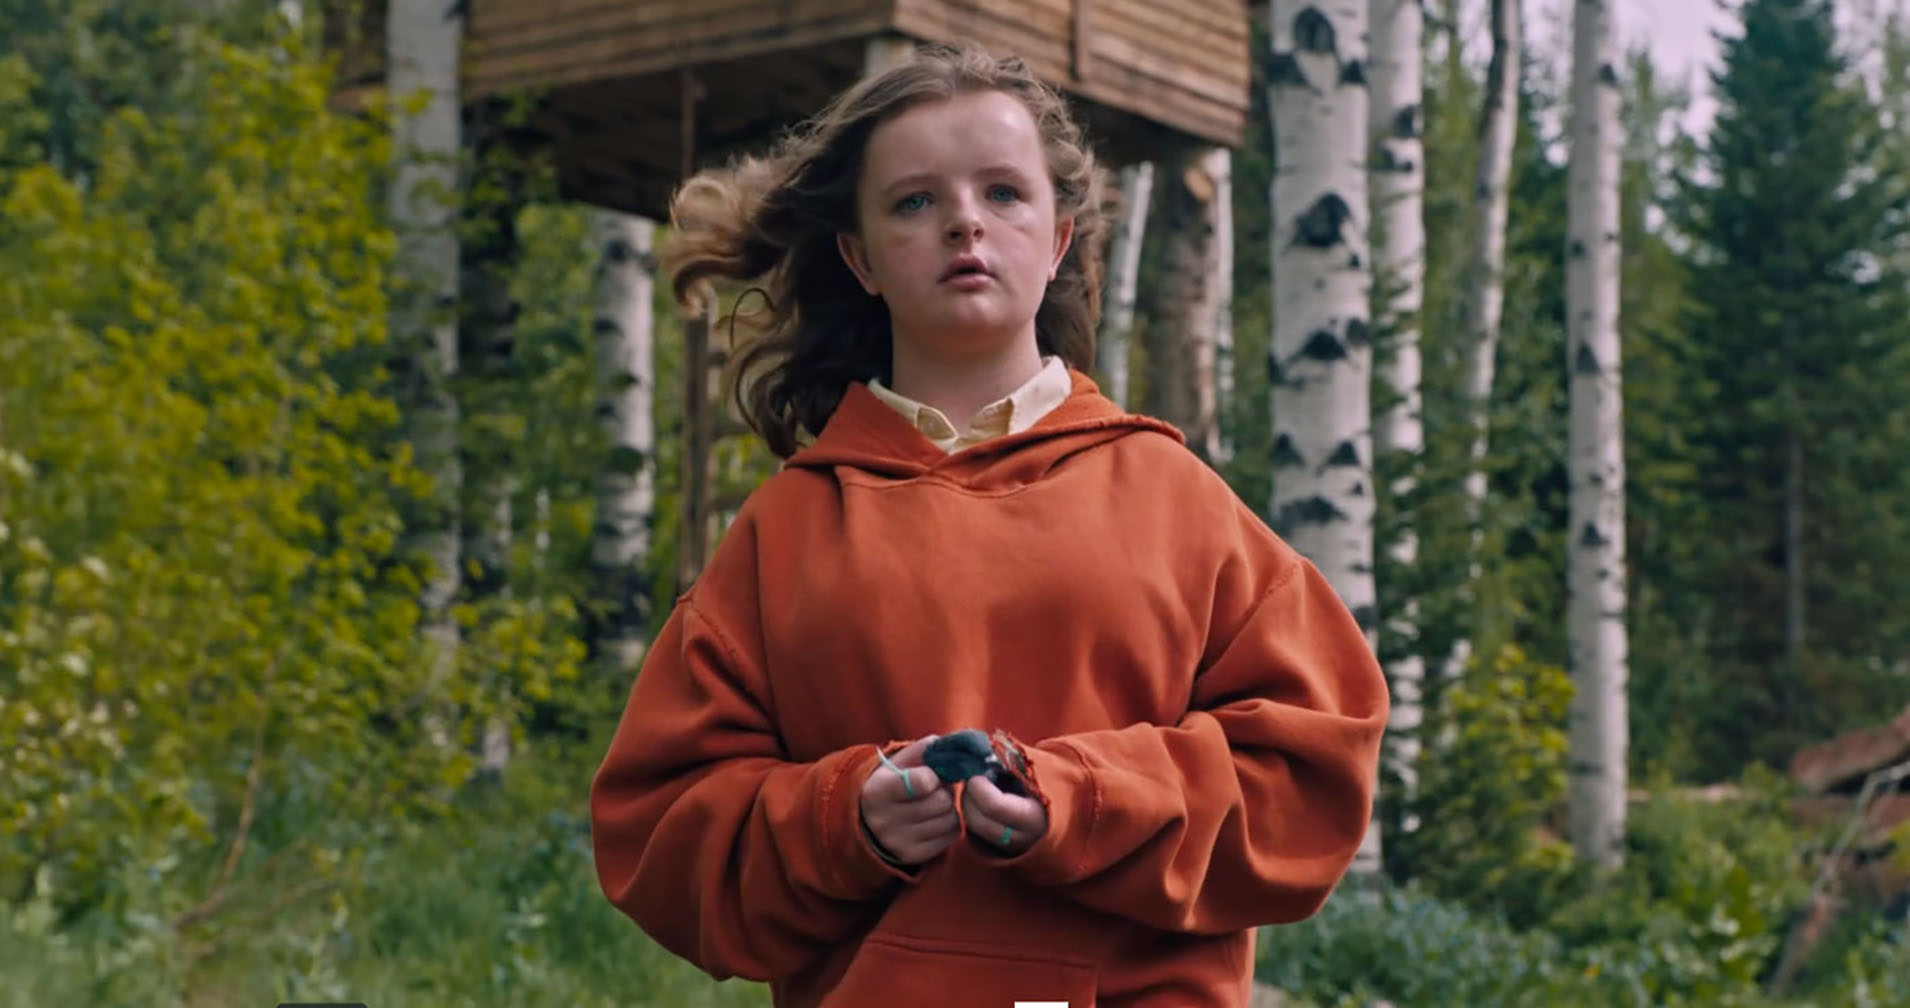 A white preteen girl in an oversized orange hoodie considering something in the distance